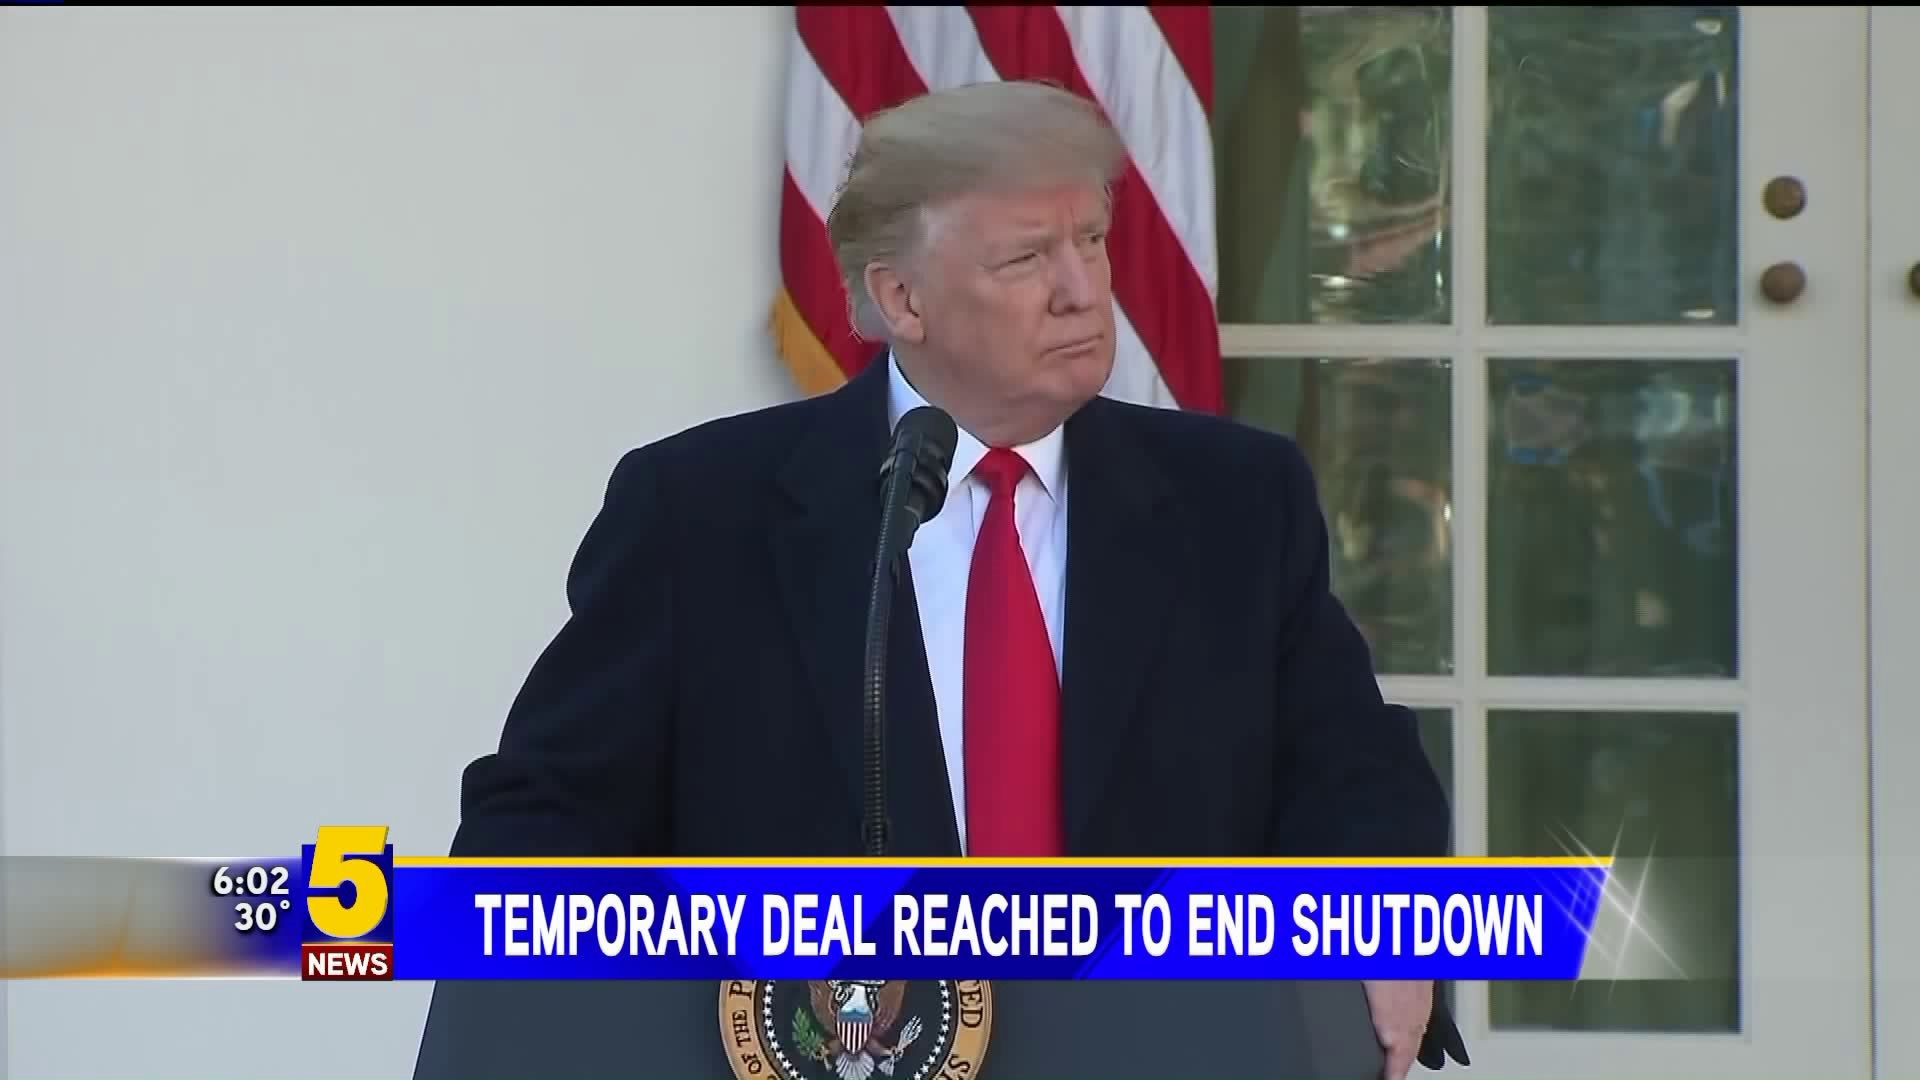 Temporary Deal Reached To End Government Shutdown